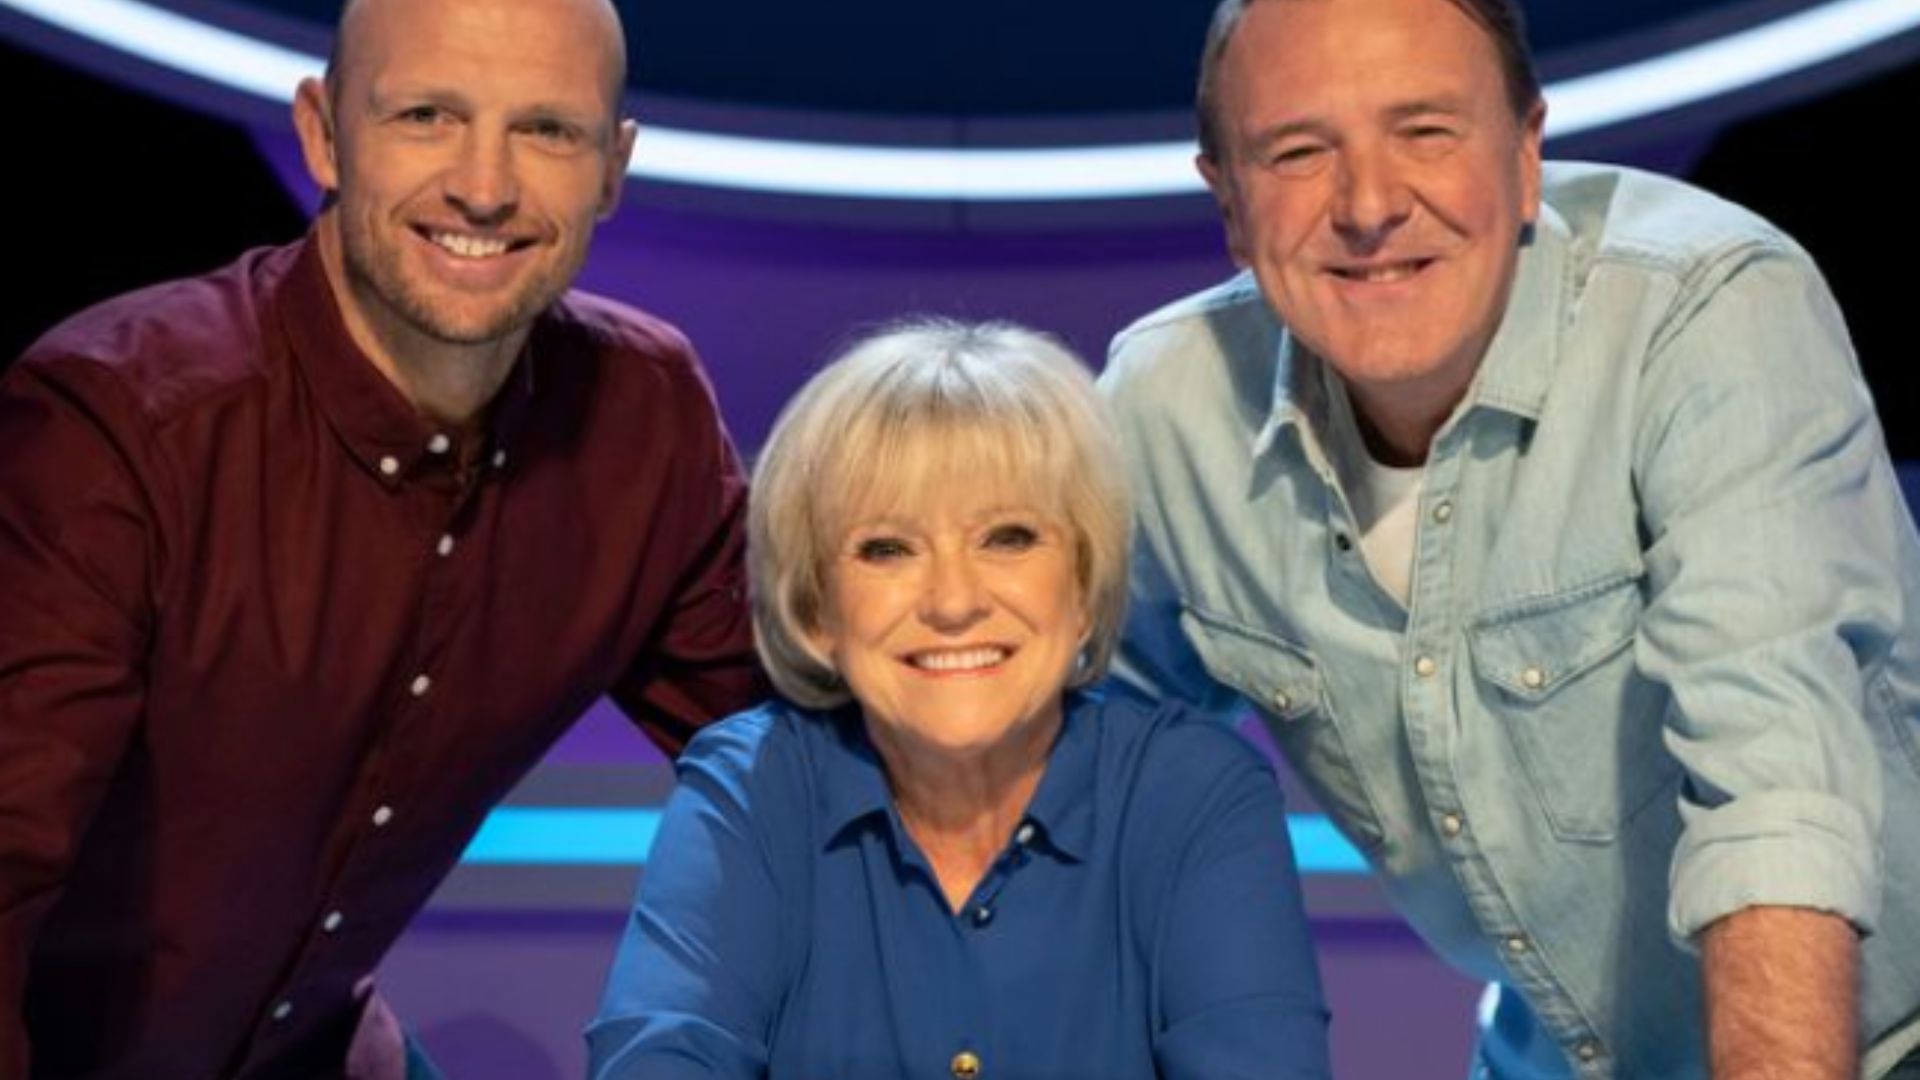 Sue Barker was left furious and offended by BBCs handling